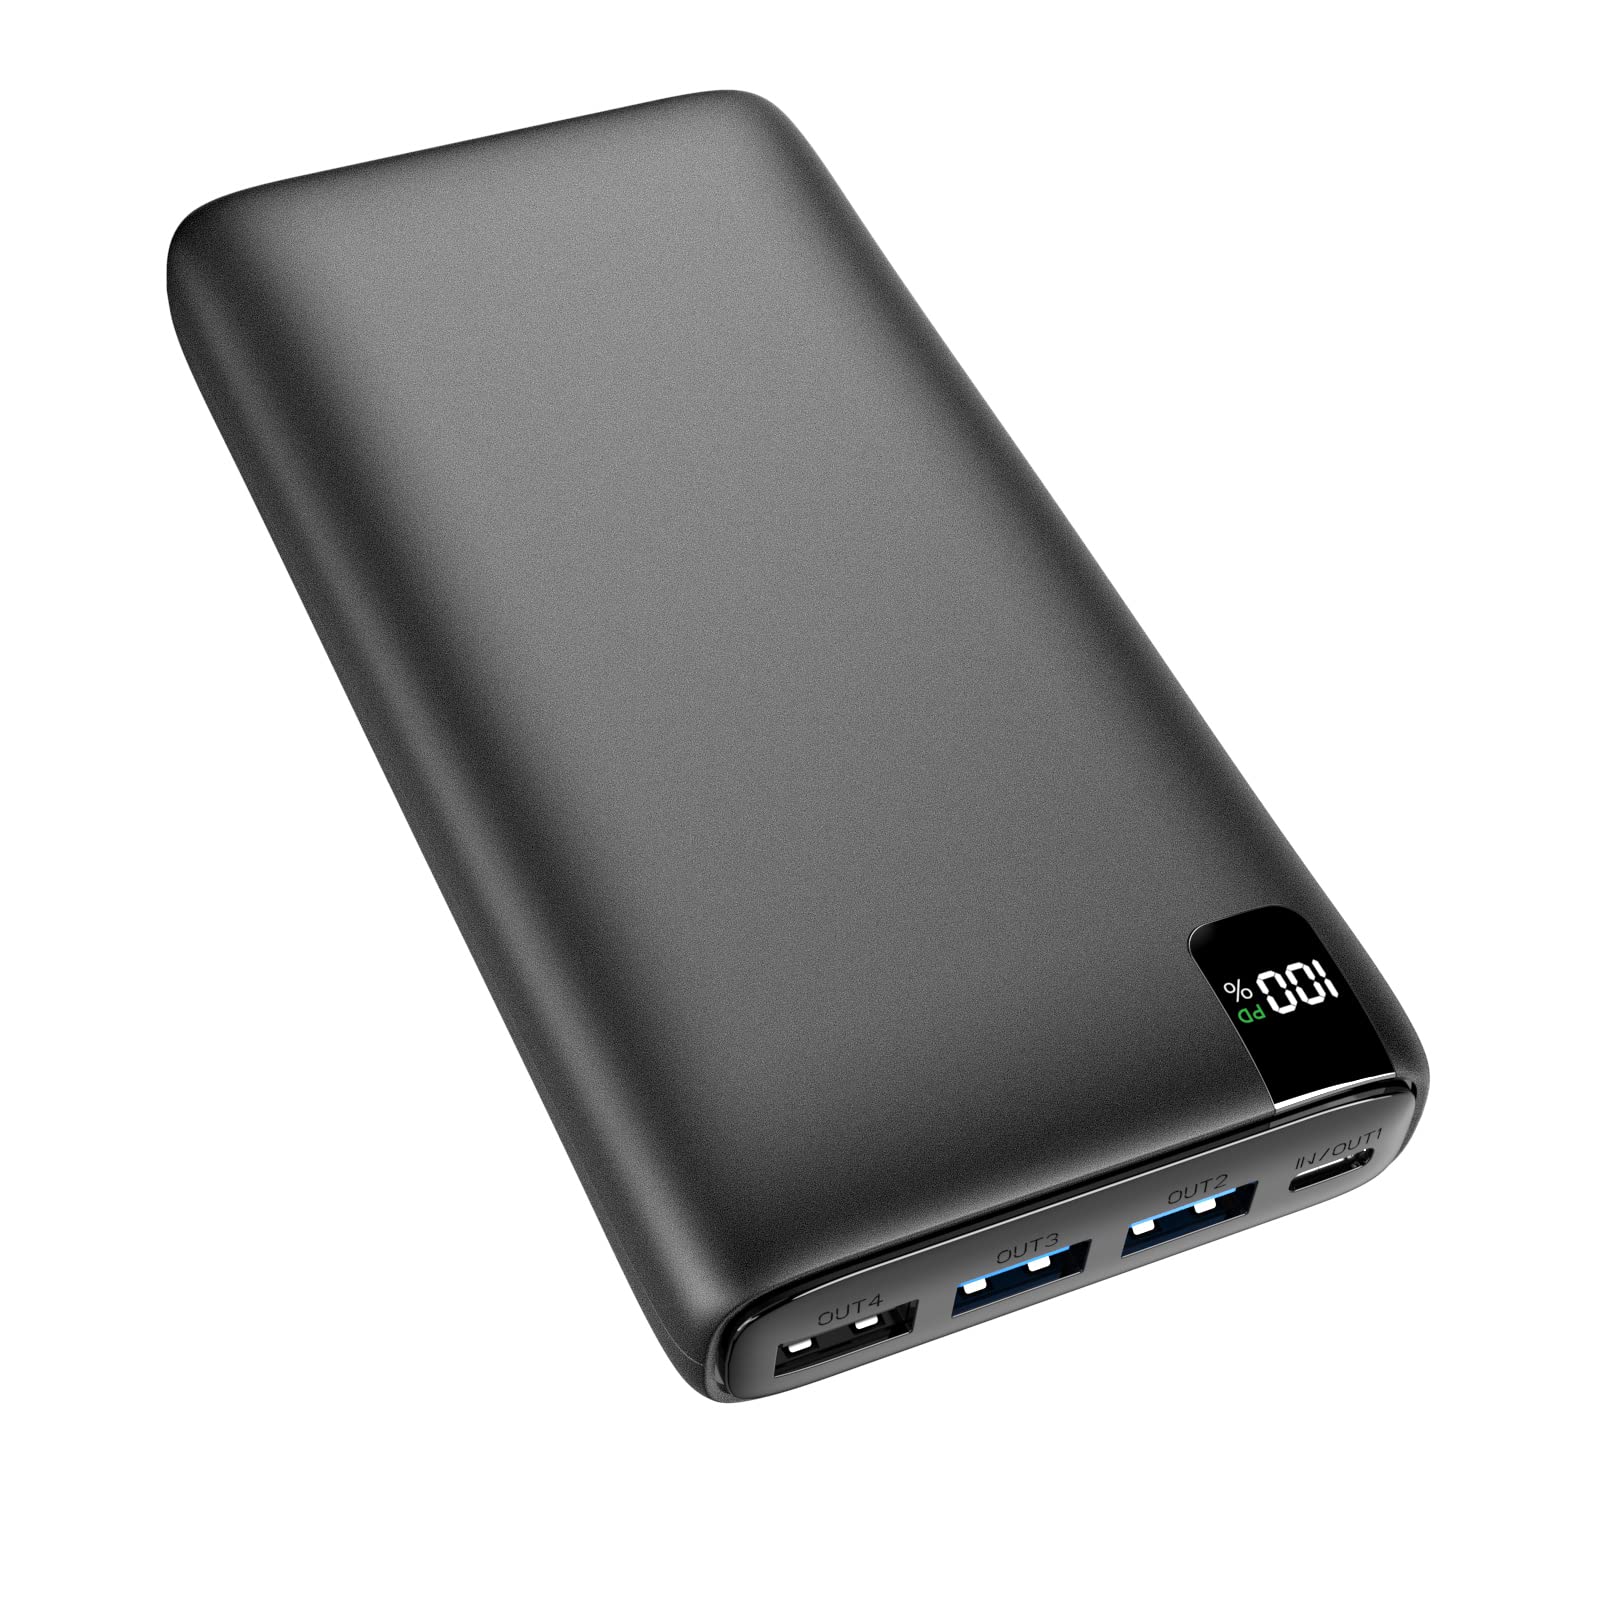 FEELLE Power Bank Portable Charger - 27000mAh USB C in & Out PD Fast Charger QC3.0 22.5W 4 Outputs External Battery Pack Compatible with iPhone, Samsung, Google, LG, Tablet and More